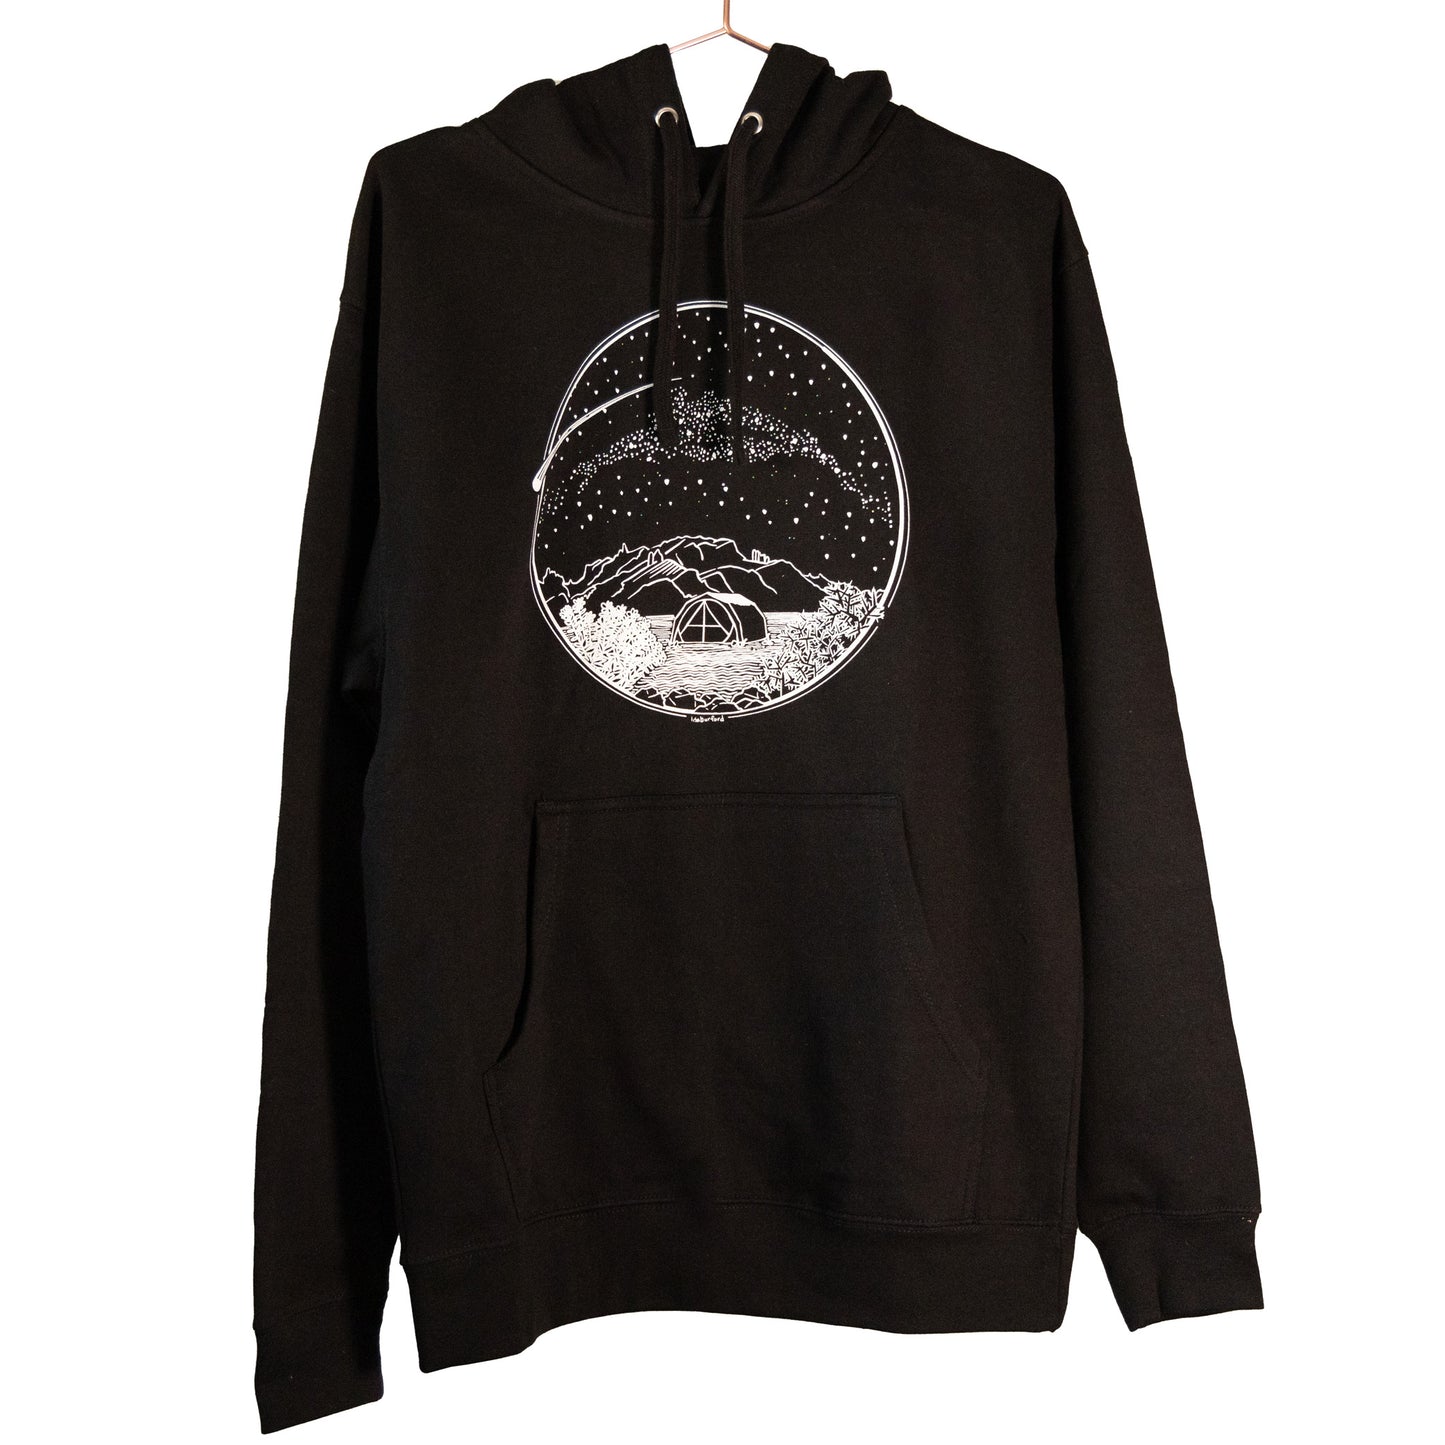 A white Desert Camping illustration on the front of the gender neutral black colored hooded sweatshirt. The illustration shows a tent in the foreground with mountains in the background, desert plants in the very foreground, and stars, the Milky Way gallaxy, and a shooting star in the sky above the tent. The design is encompassed in a circular shape.